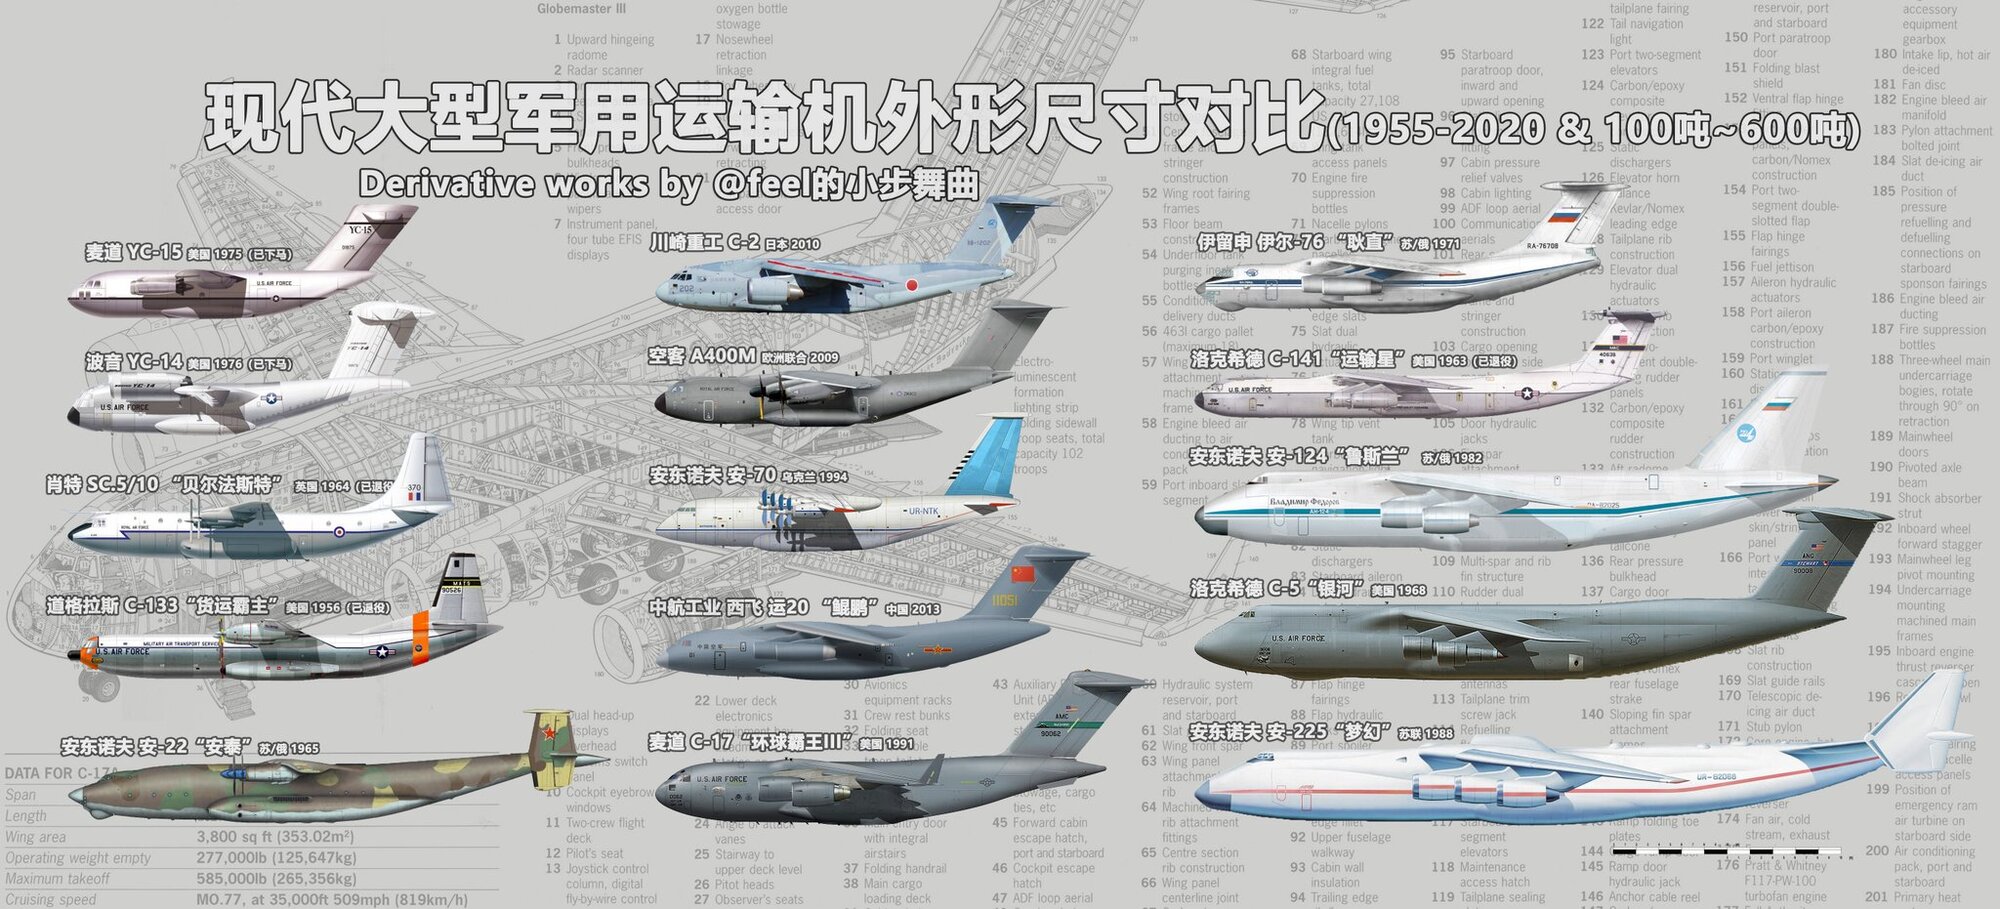 Visual Comparison of shape and size of Large Transport Aircraft 01.jpeg